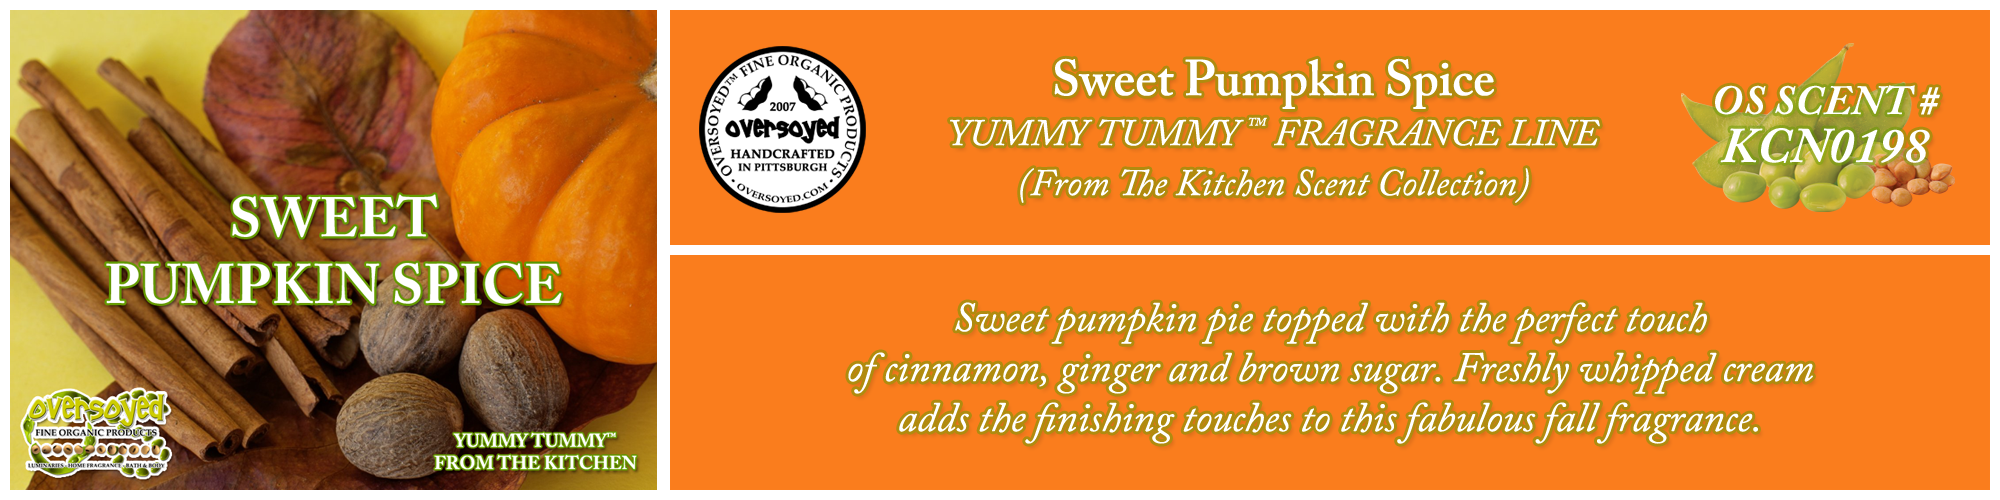 Sweet Pumpkin Spice Handcrafted Products Collection